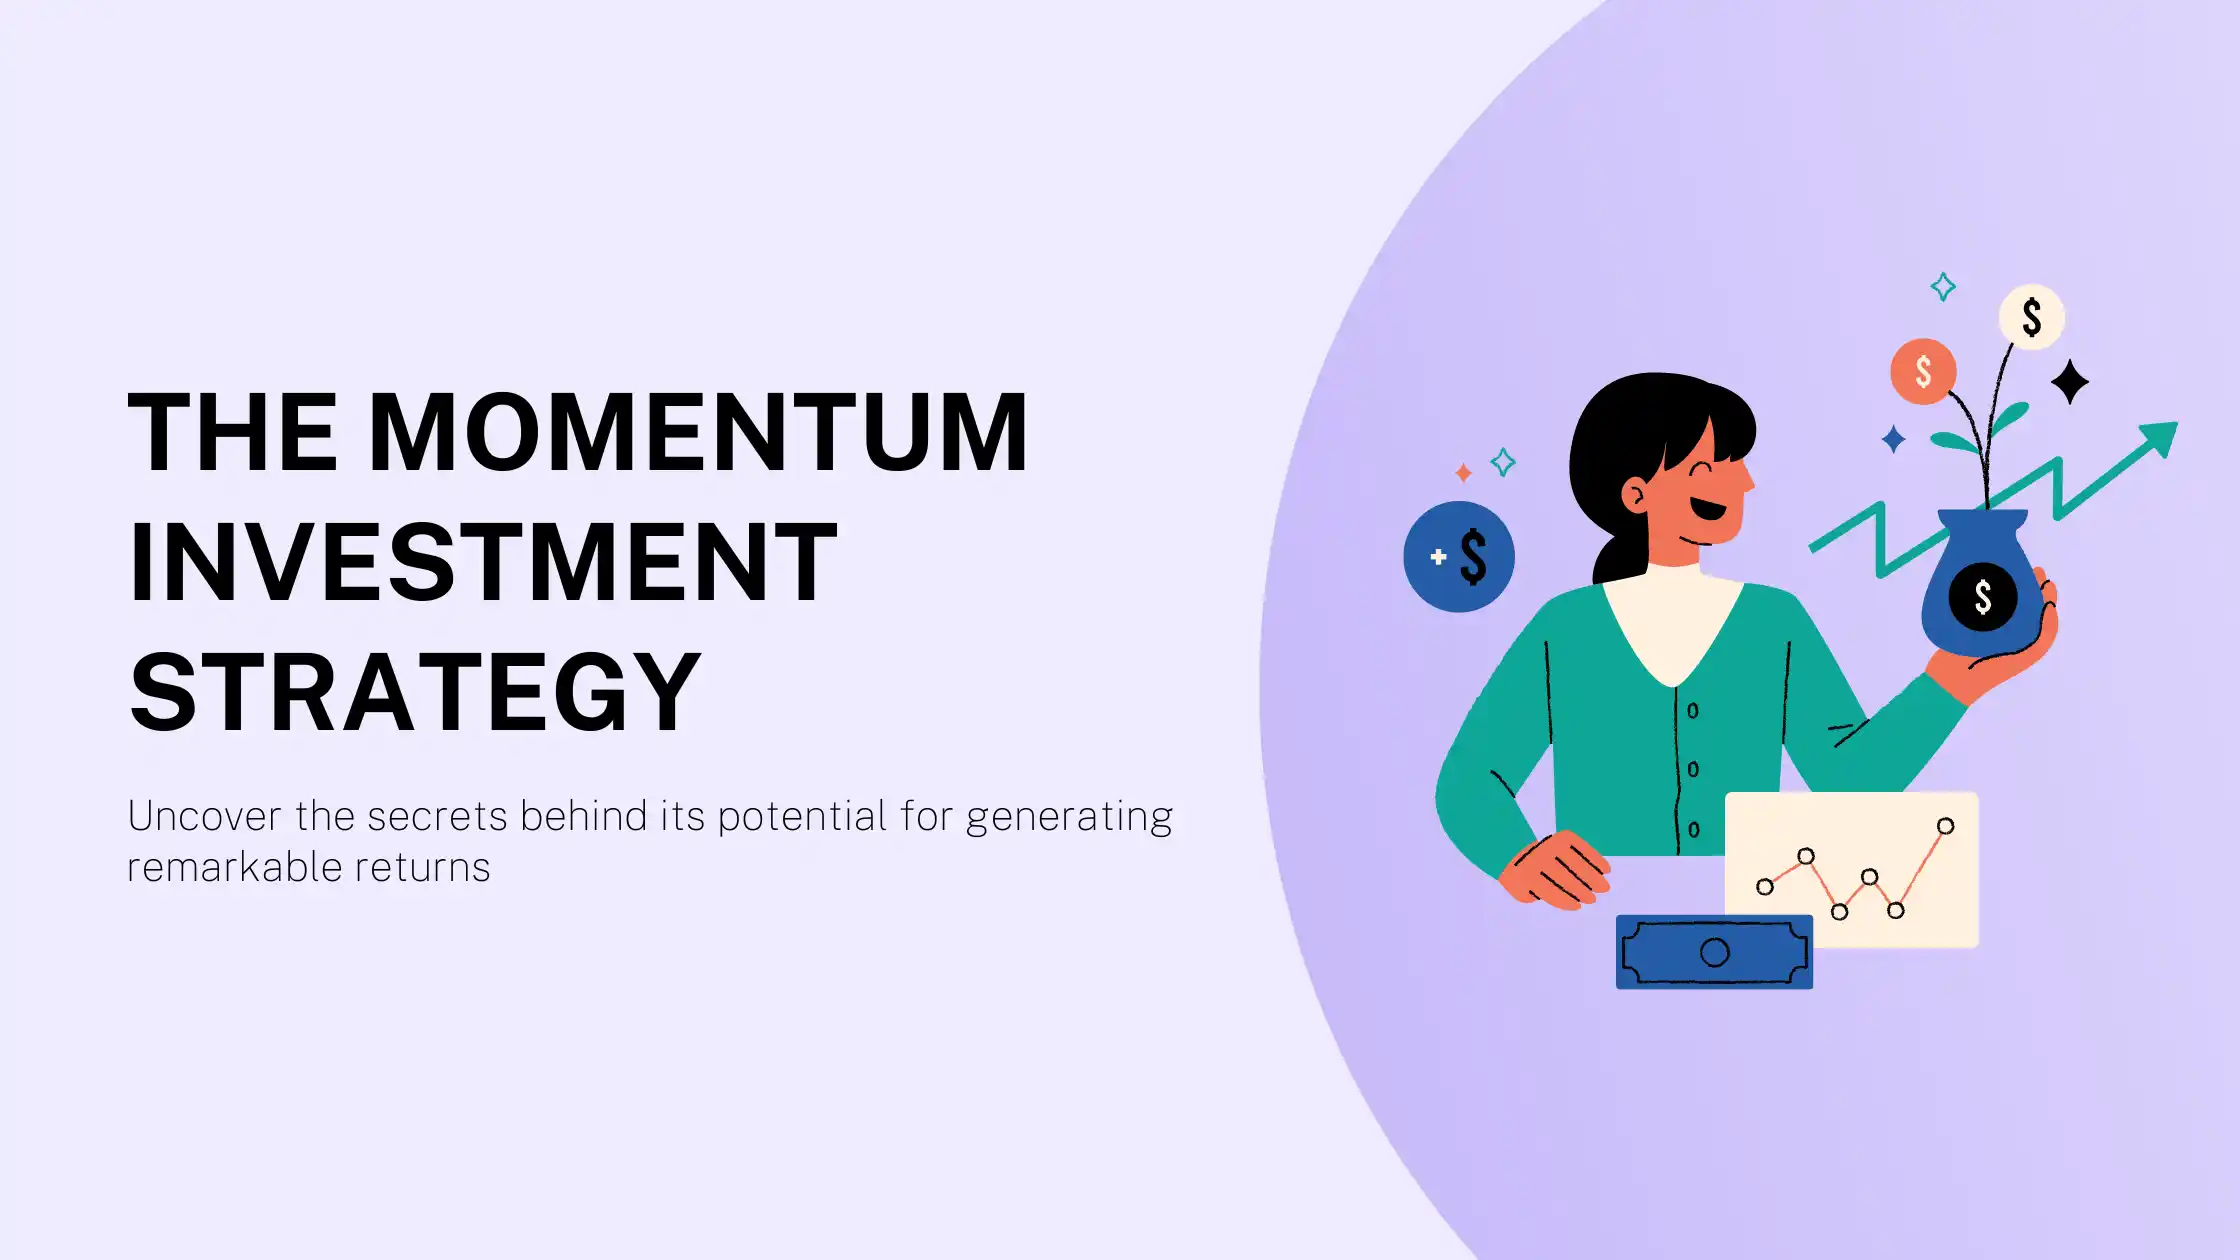 What is the Momentum Investment Strategy?